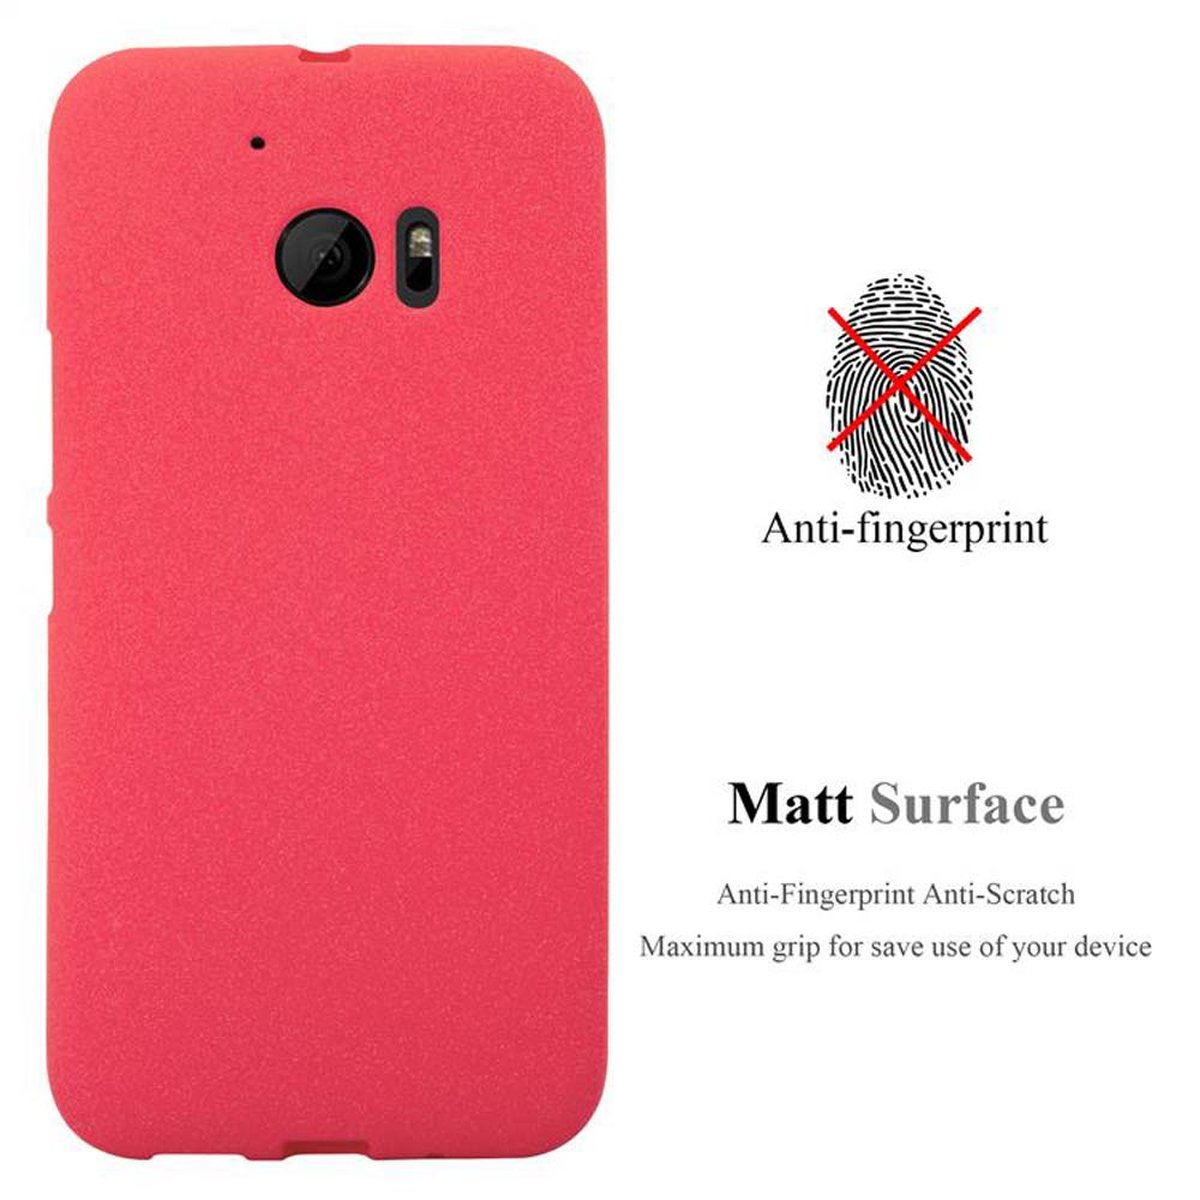 ONE FROST Backcover, Schutzhülle, HTC, ROT TPU CADORABO M10, Frosted